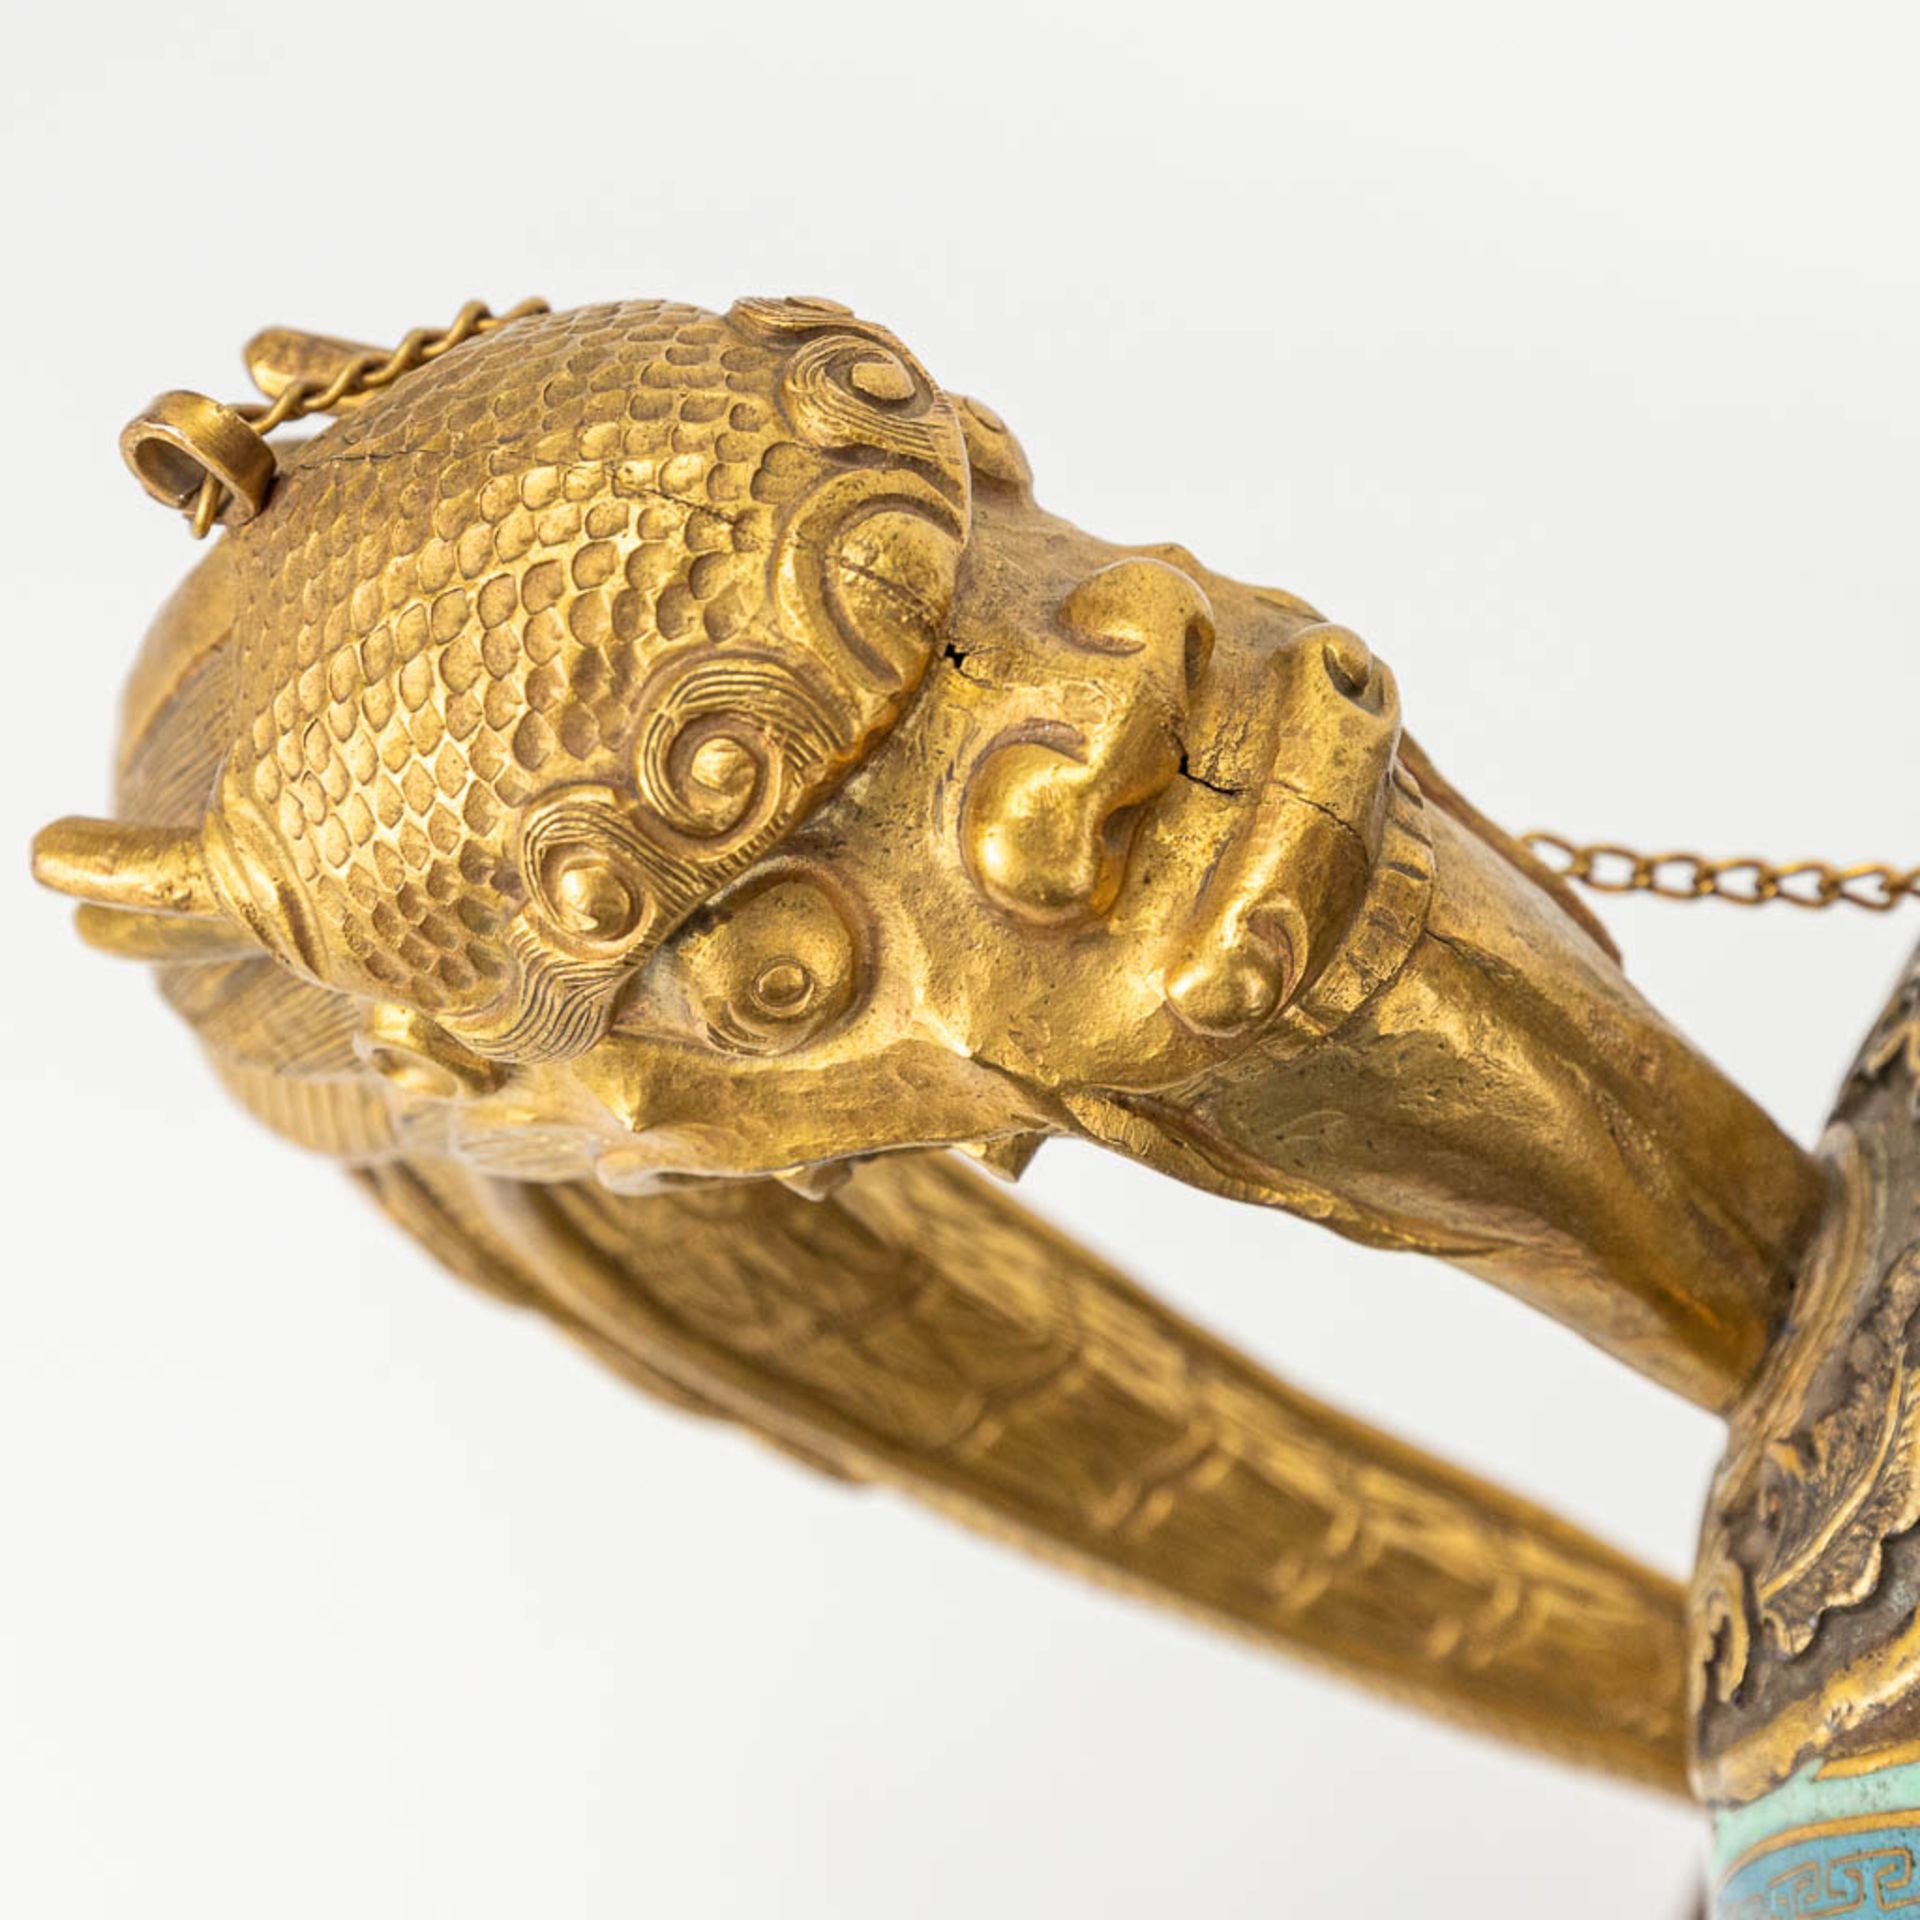 A Tibetan ceremonial ewer made of gilt bronze and finished with cloisonnŽ bronze. - Image 4 of 18